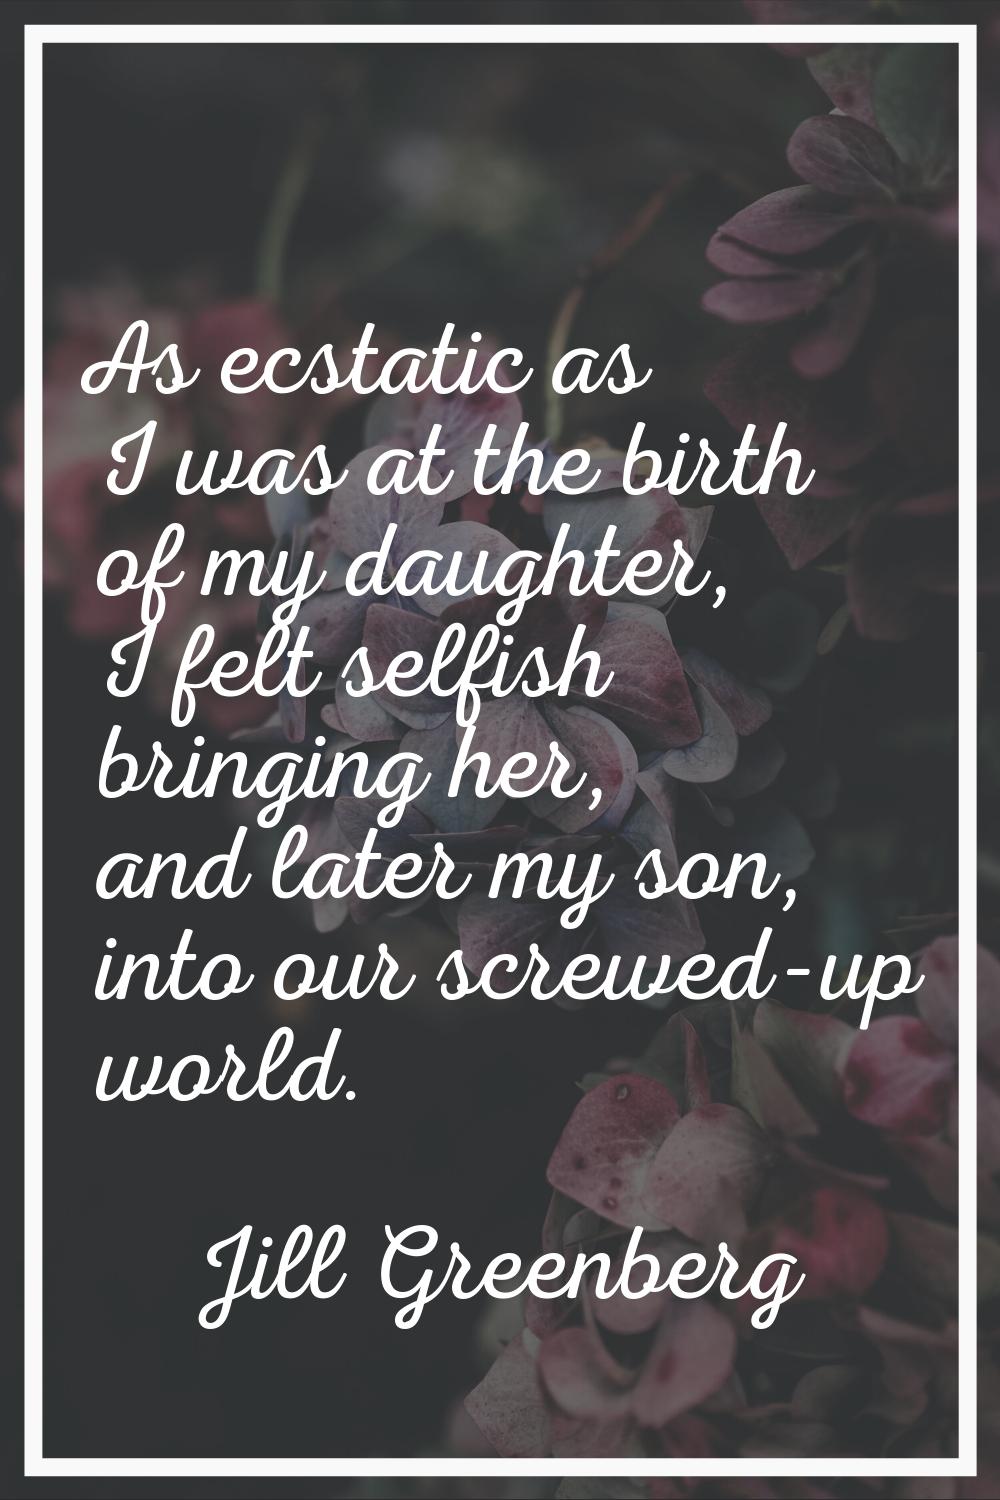 As ecstatic as I was at the birth of my daughter, I felt selfish bringing her, and later my son, in